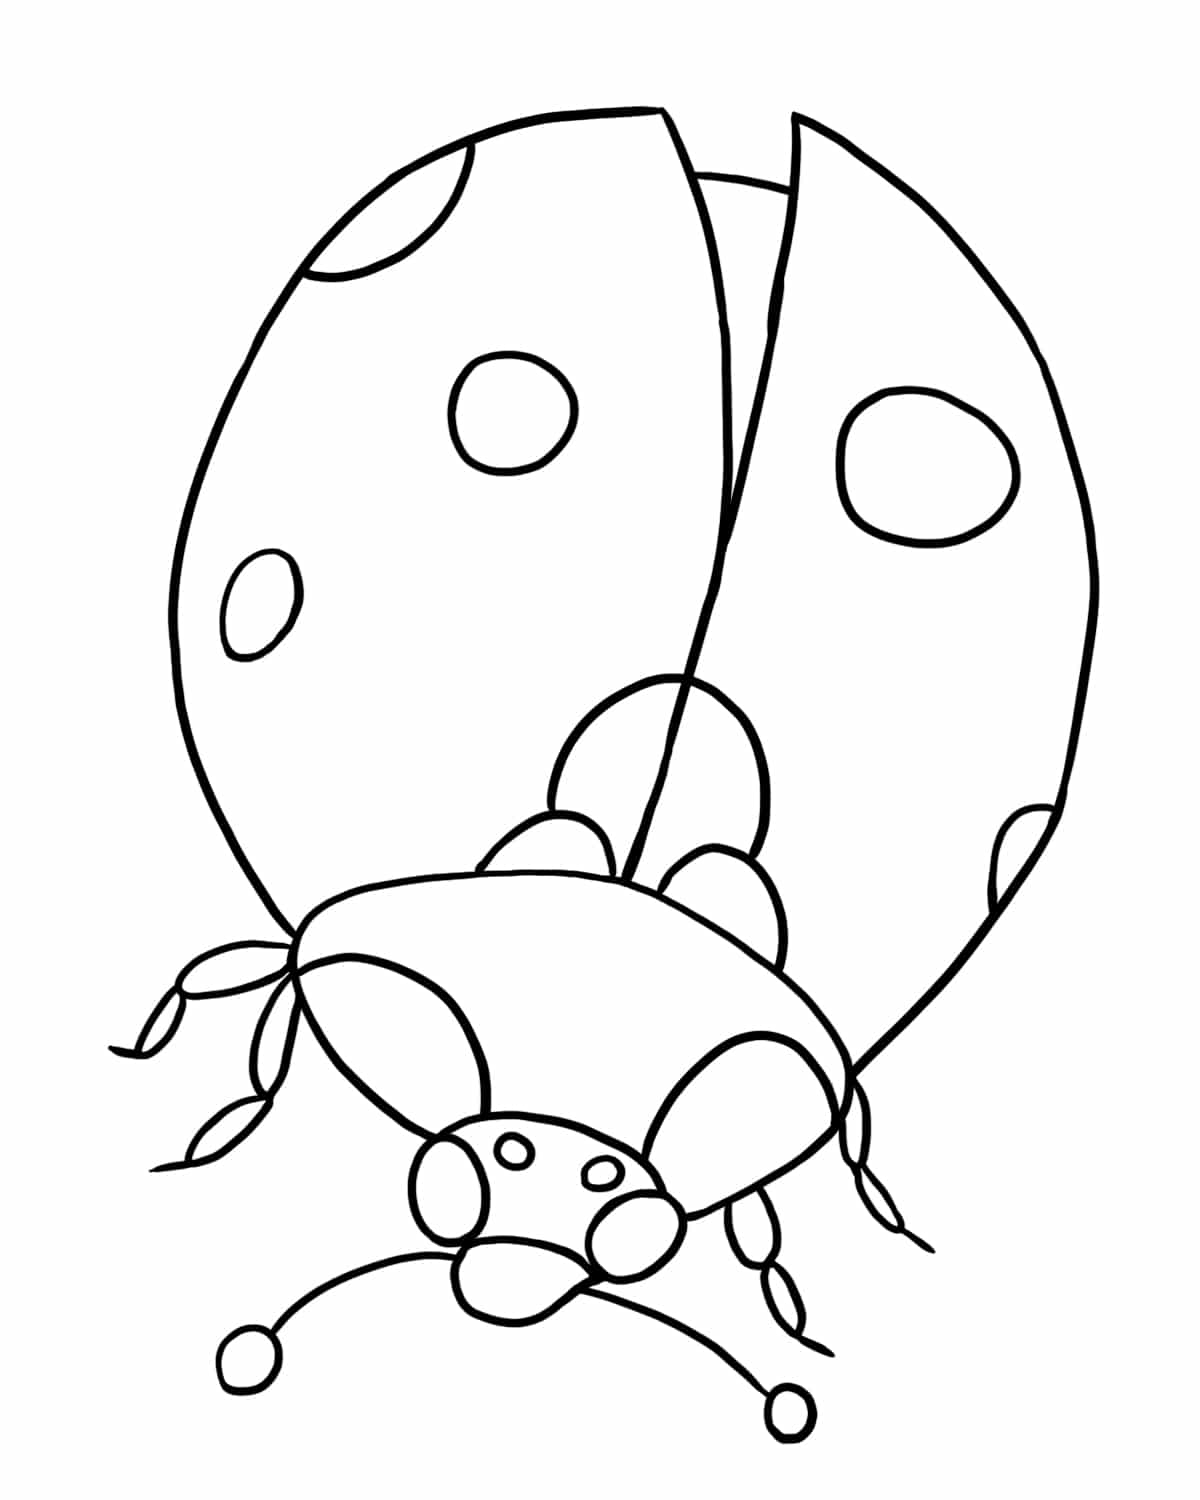 Ladybug coloring pages drawings